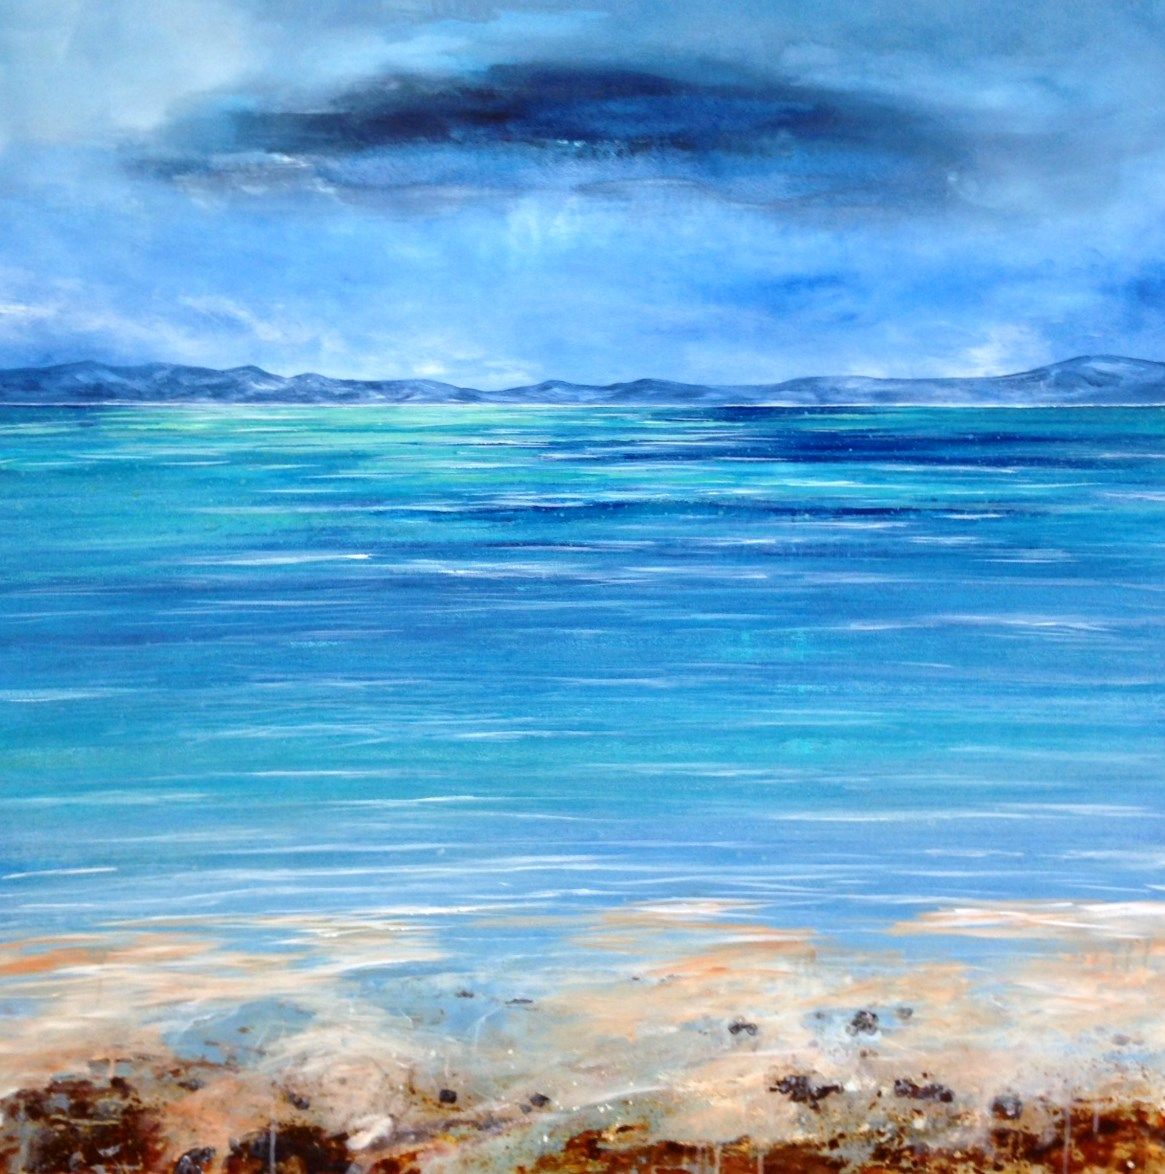 Seascape I (GC040) by Gina Chamier